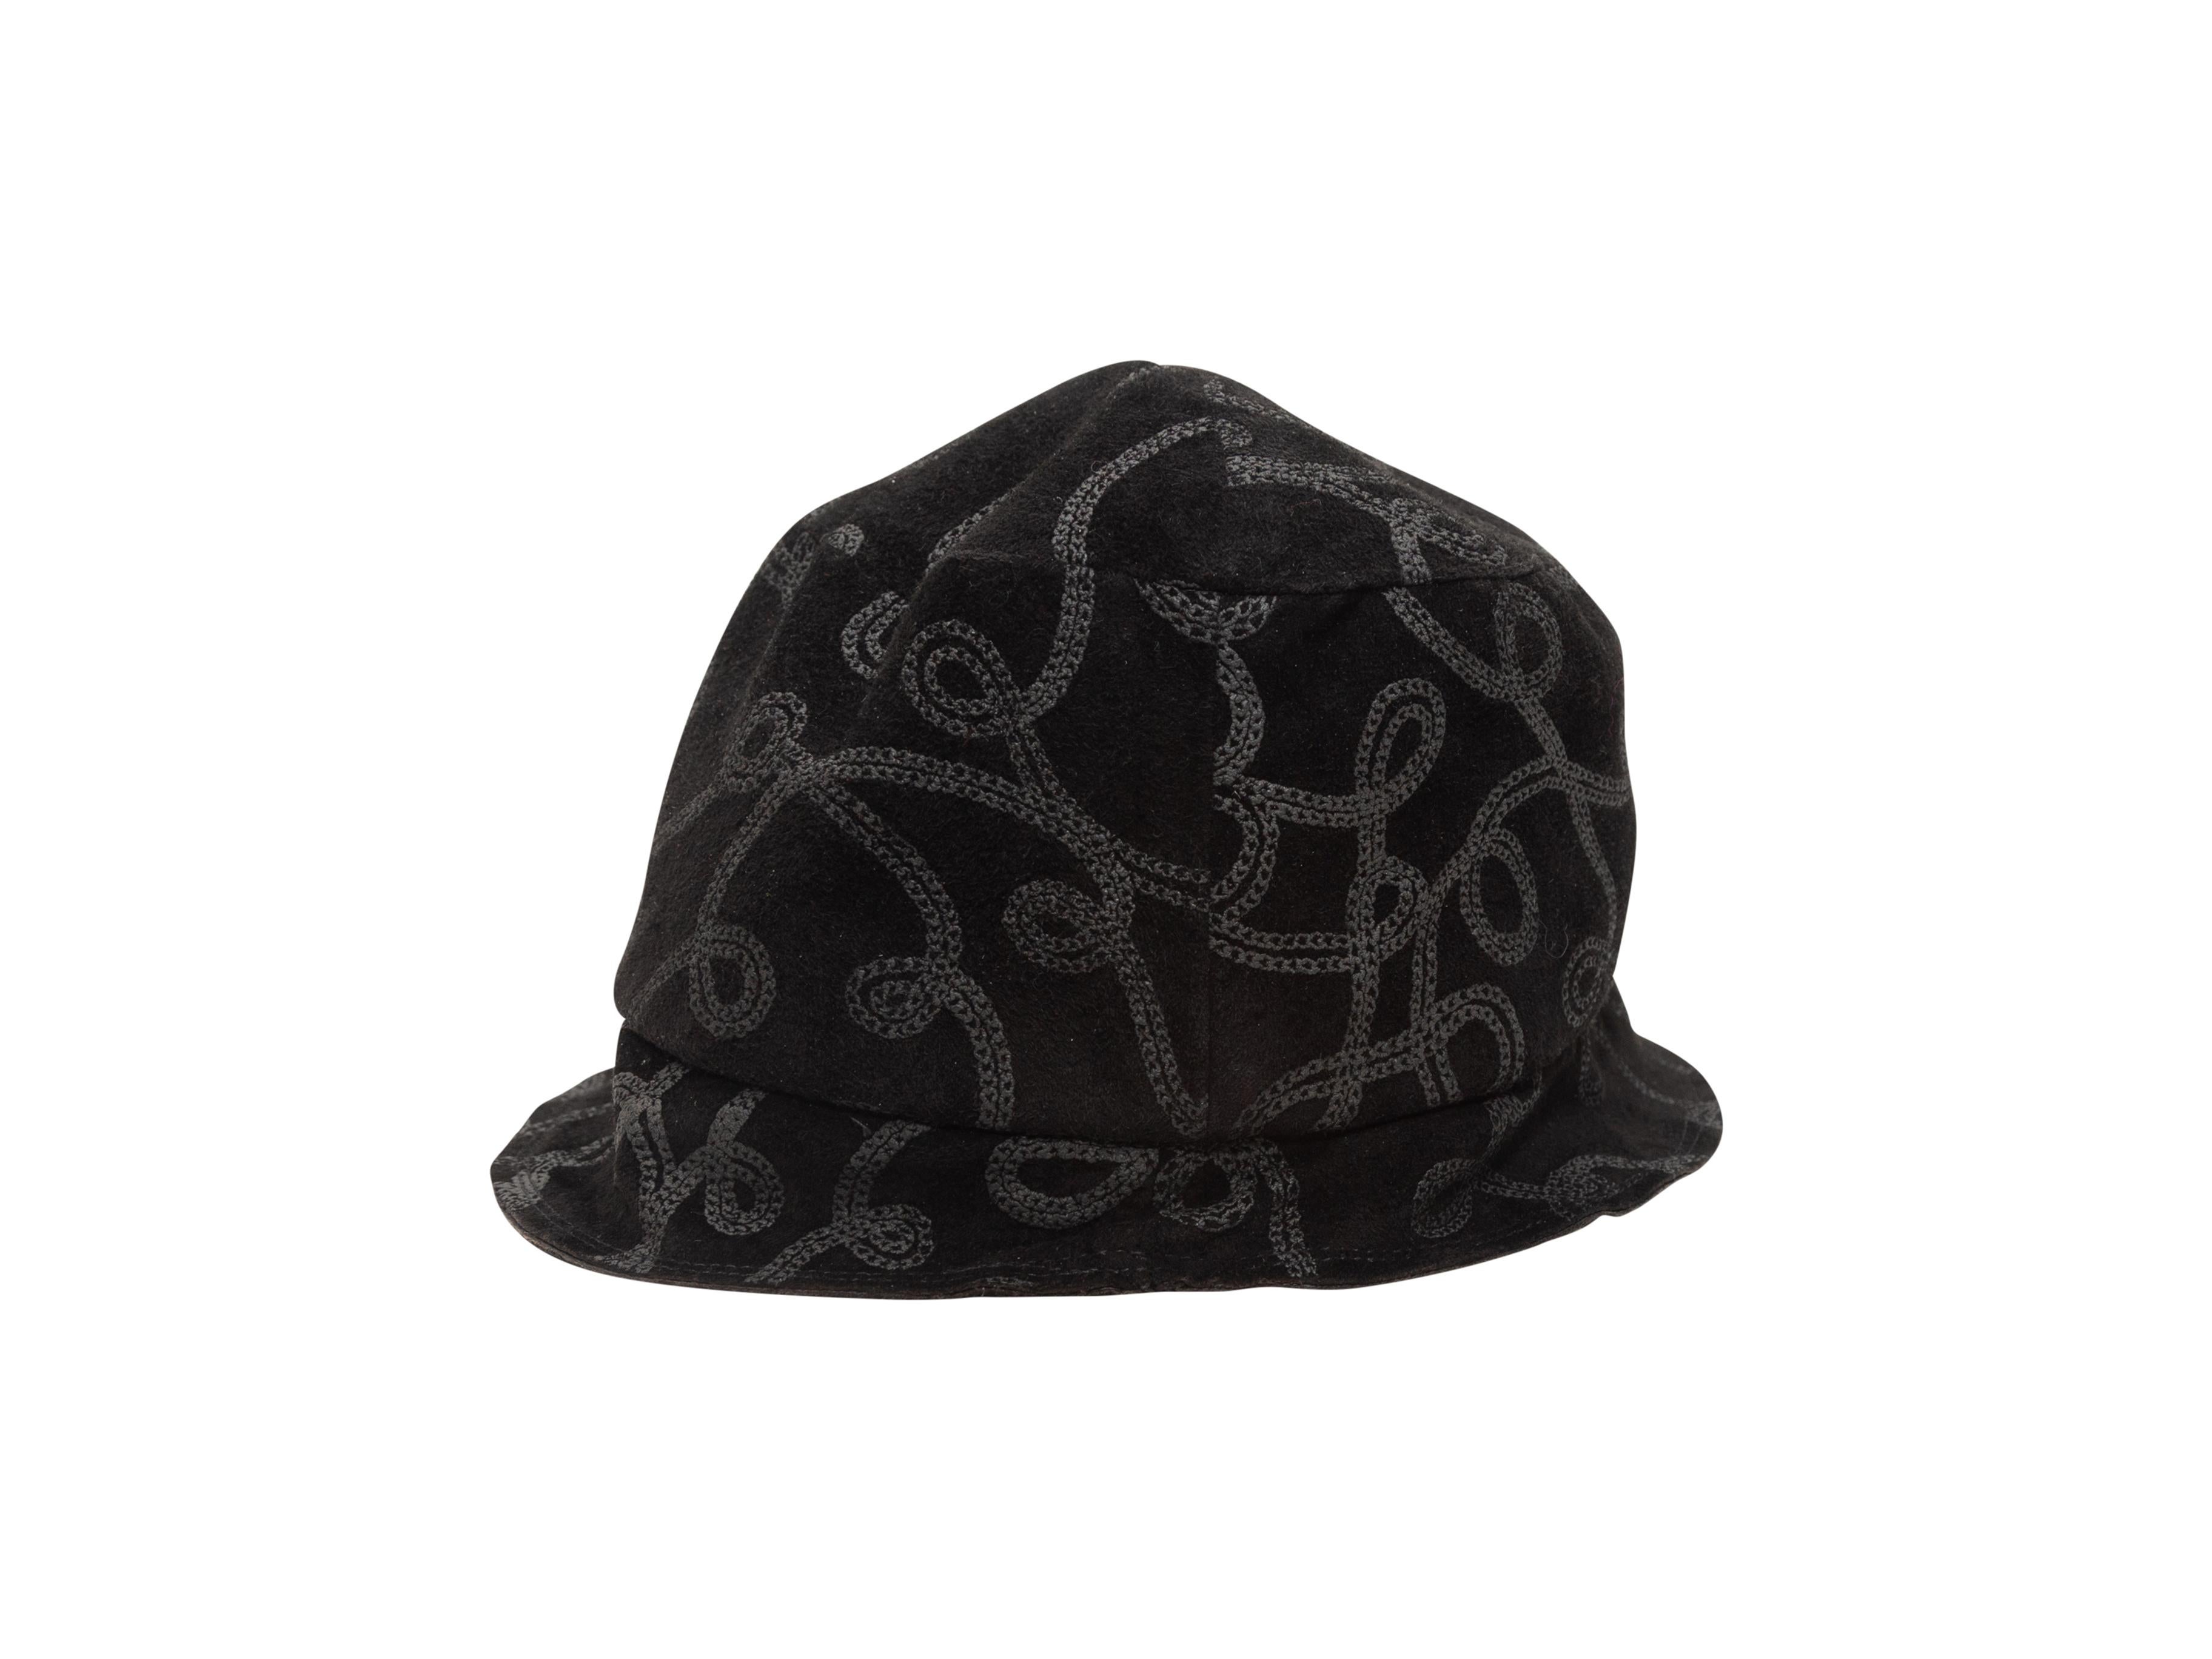 Product Details: Black bucket hat by Patricia Underwood. Tonal loop pattern throughout. 3.25